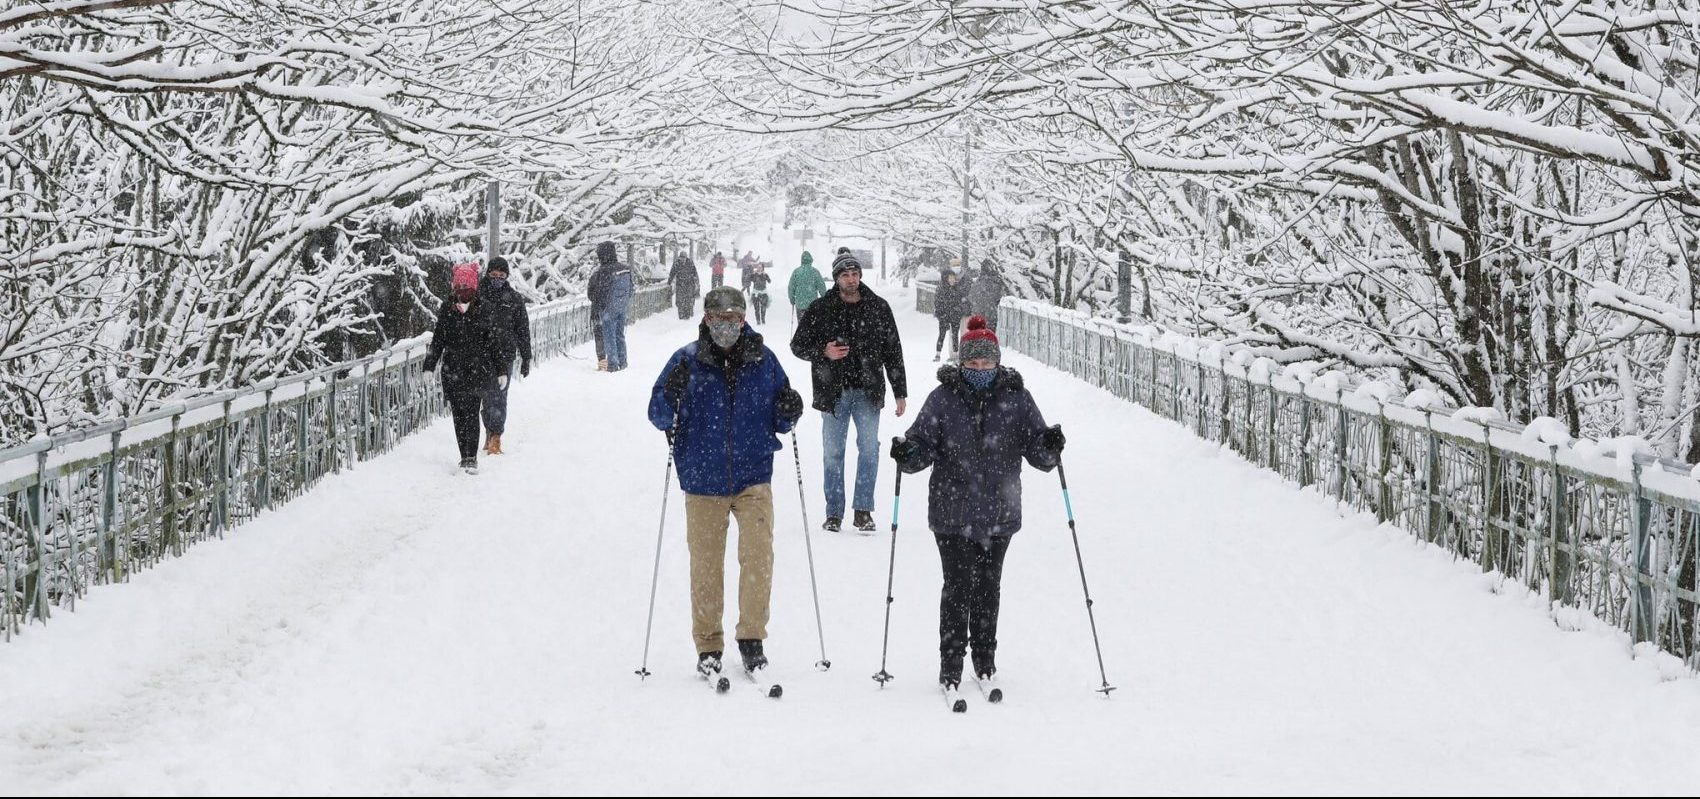 Residents ski the streets